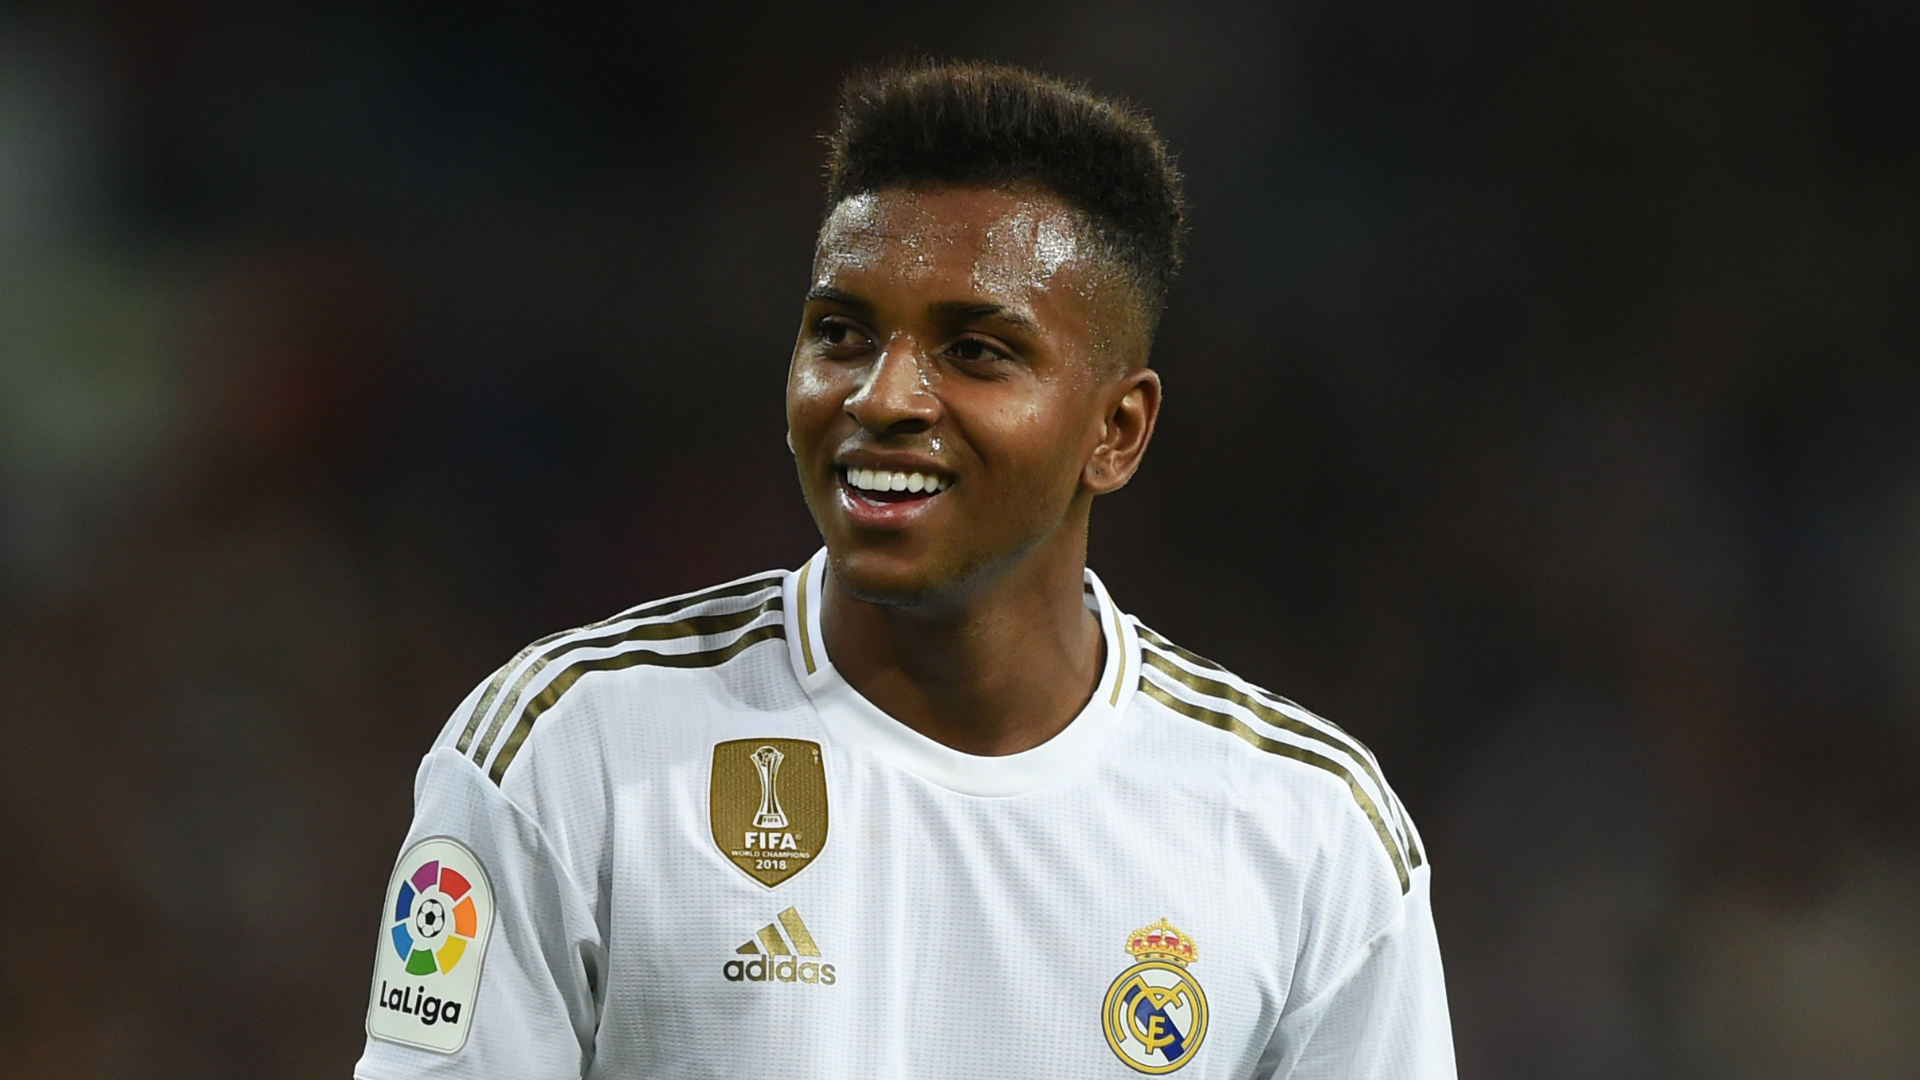 Tite spent his first meeting with Rodrygo telling the Real Madrid youngster to hug his parents for moulding him into an upstanding person.